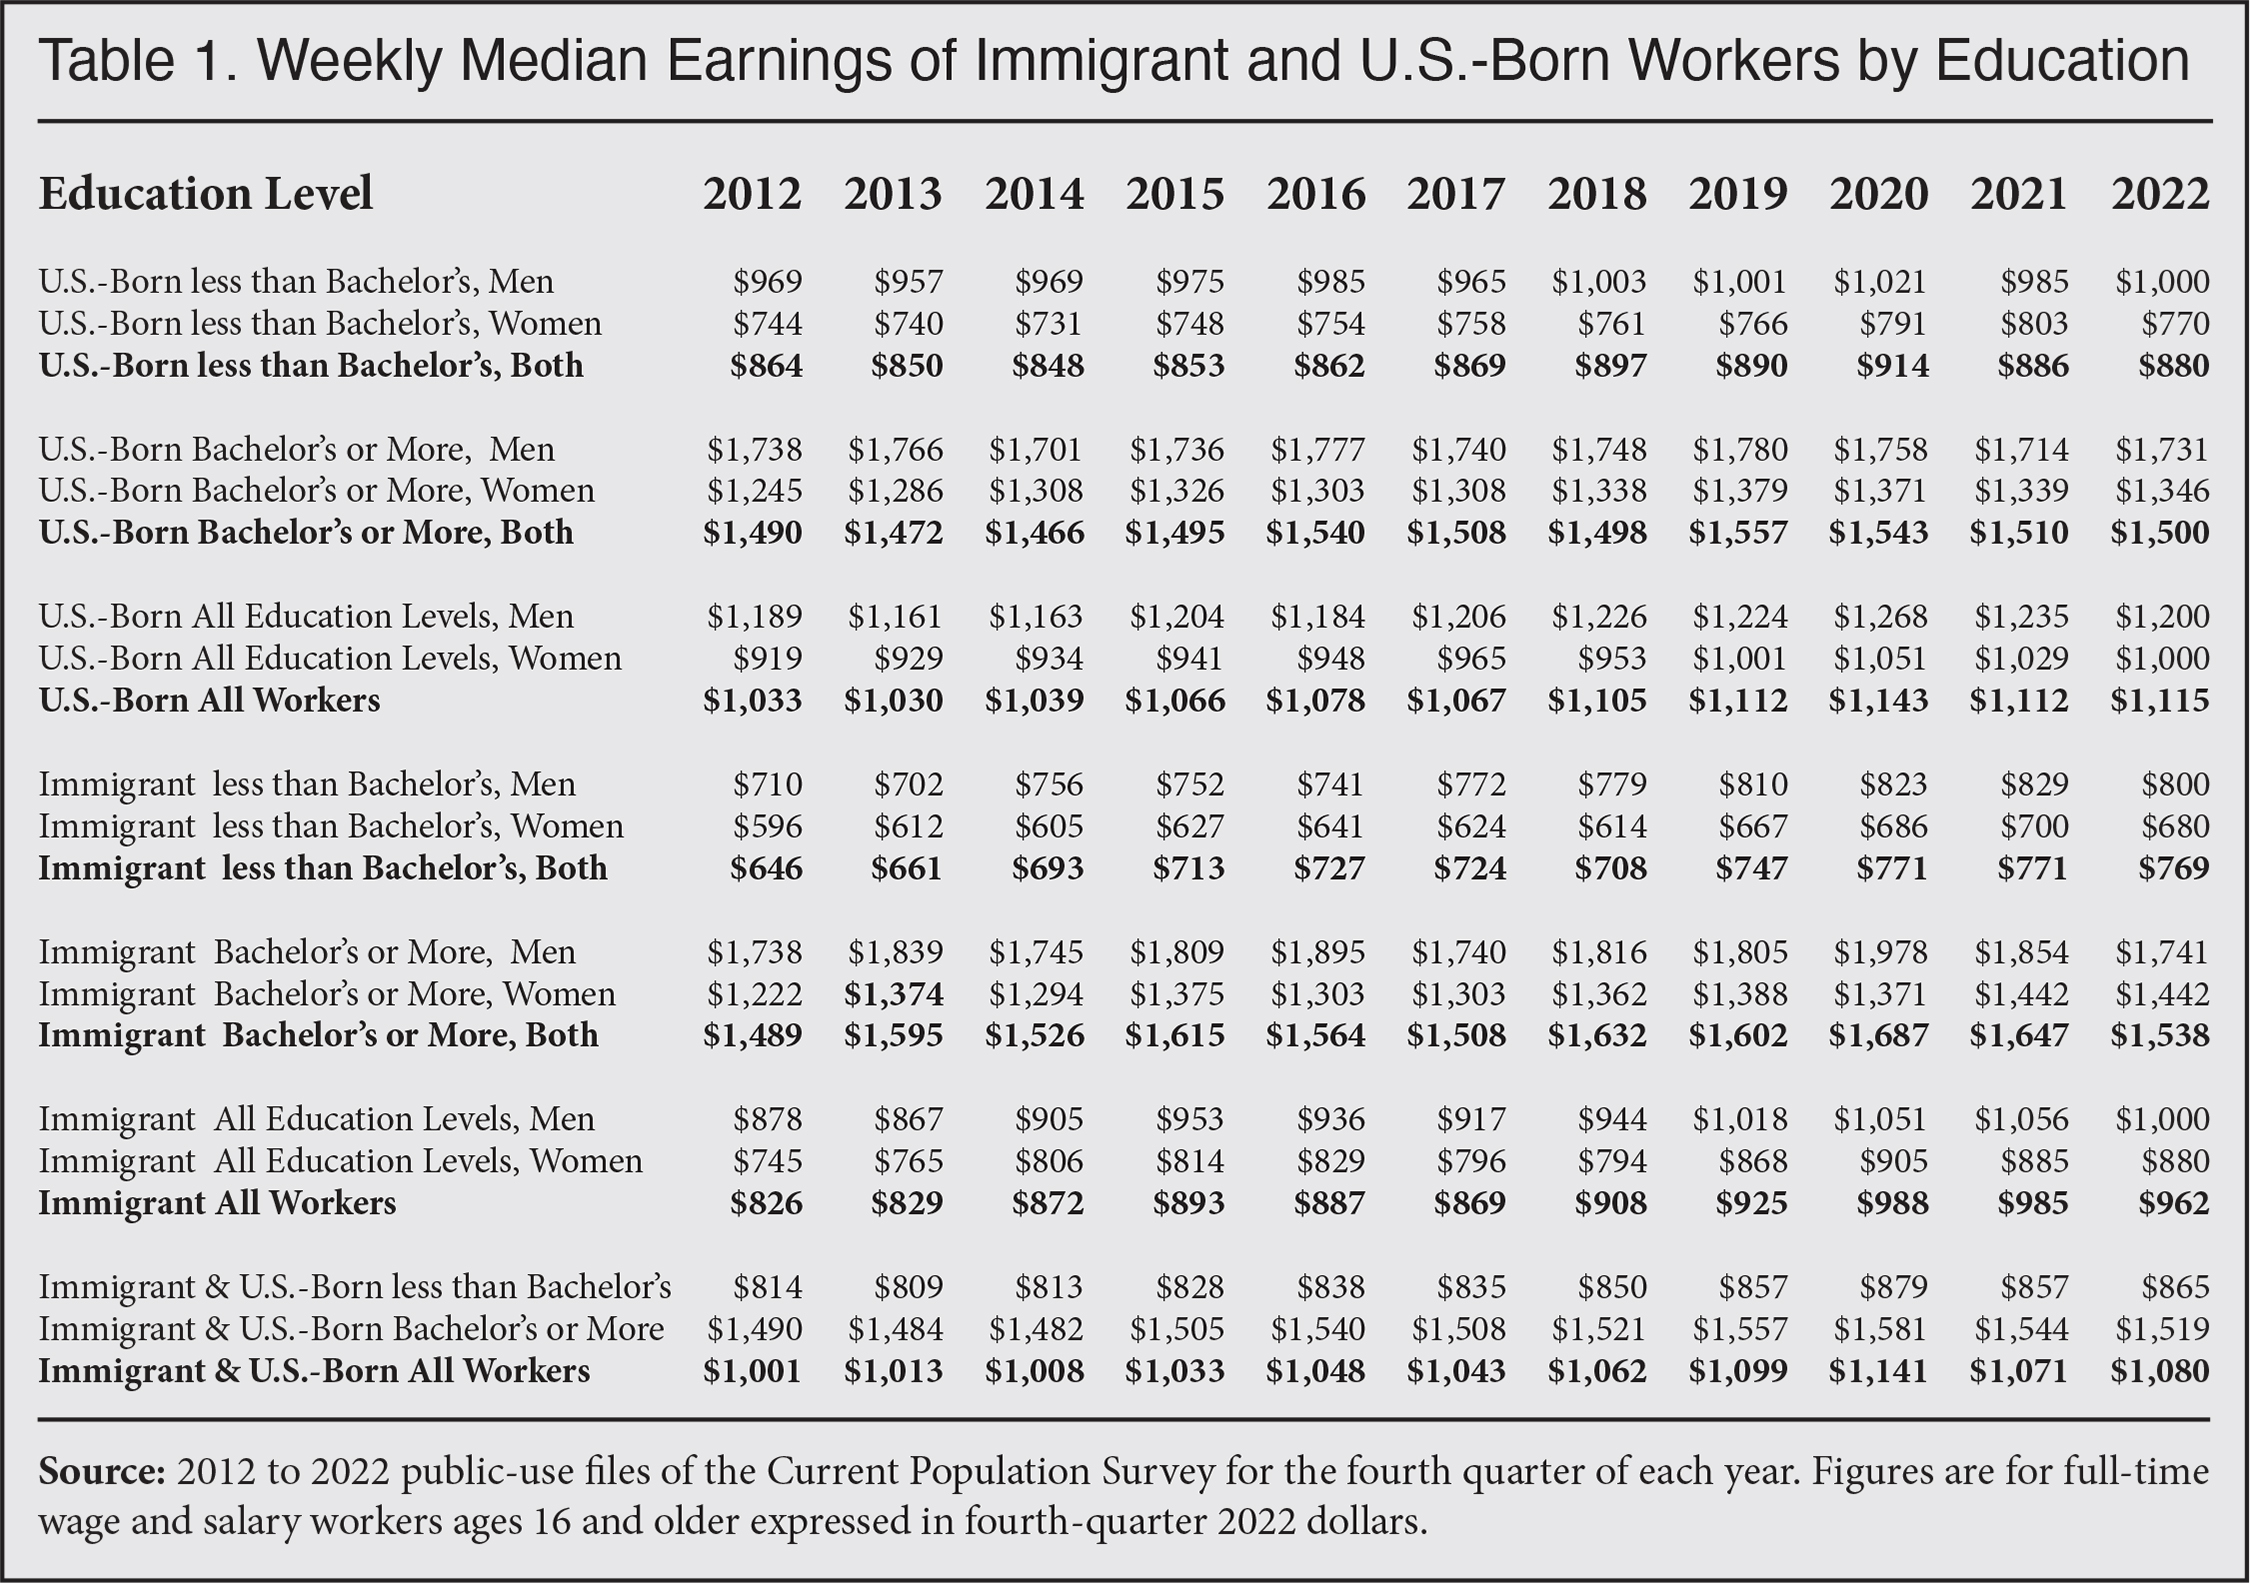 Table: Weekly median earnings of immigrant and US born workers by education